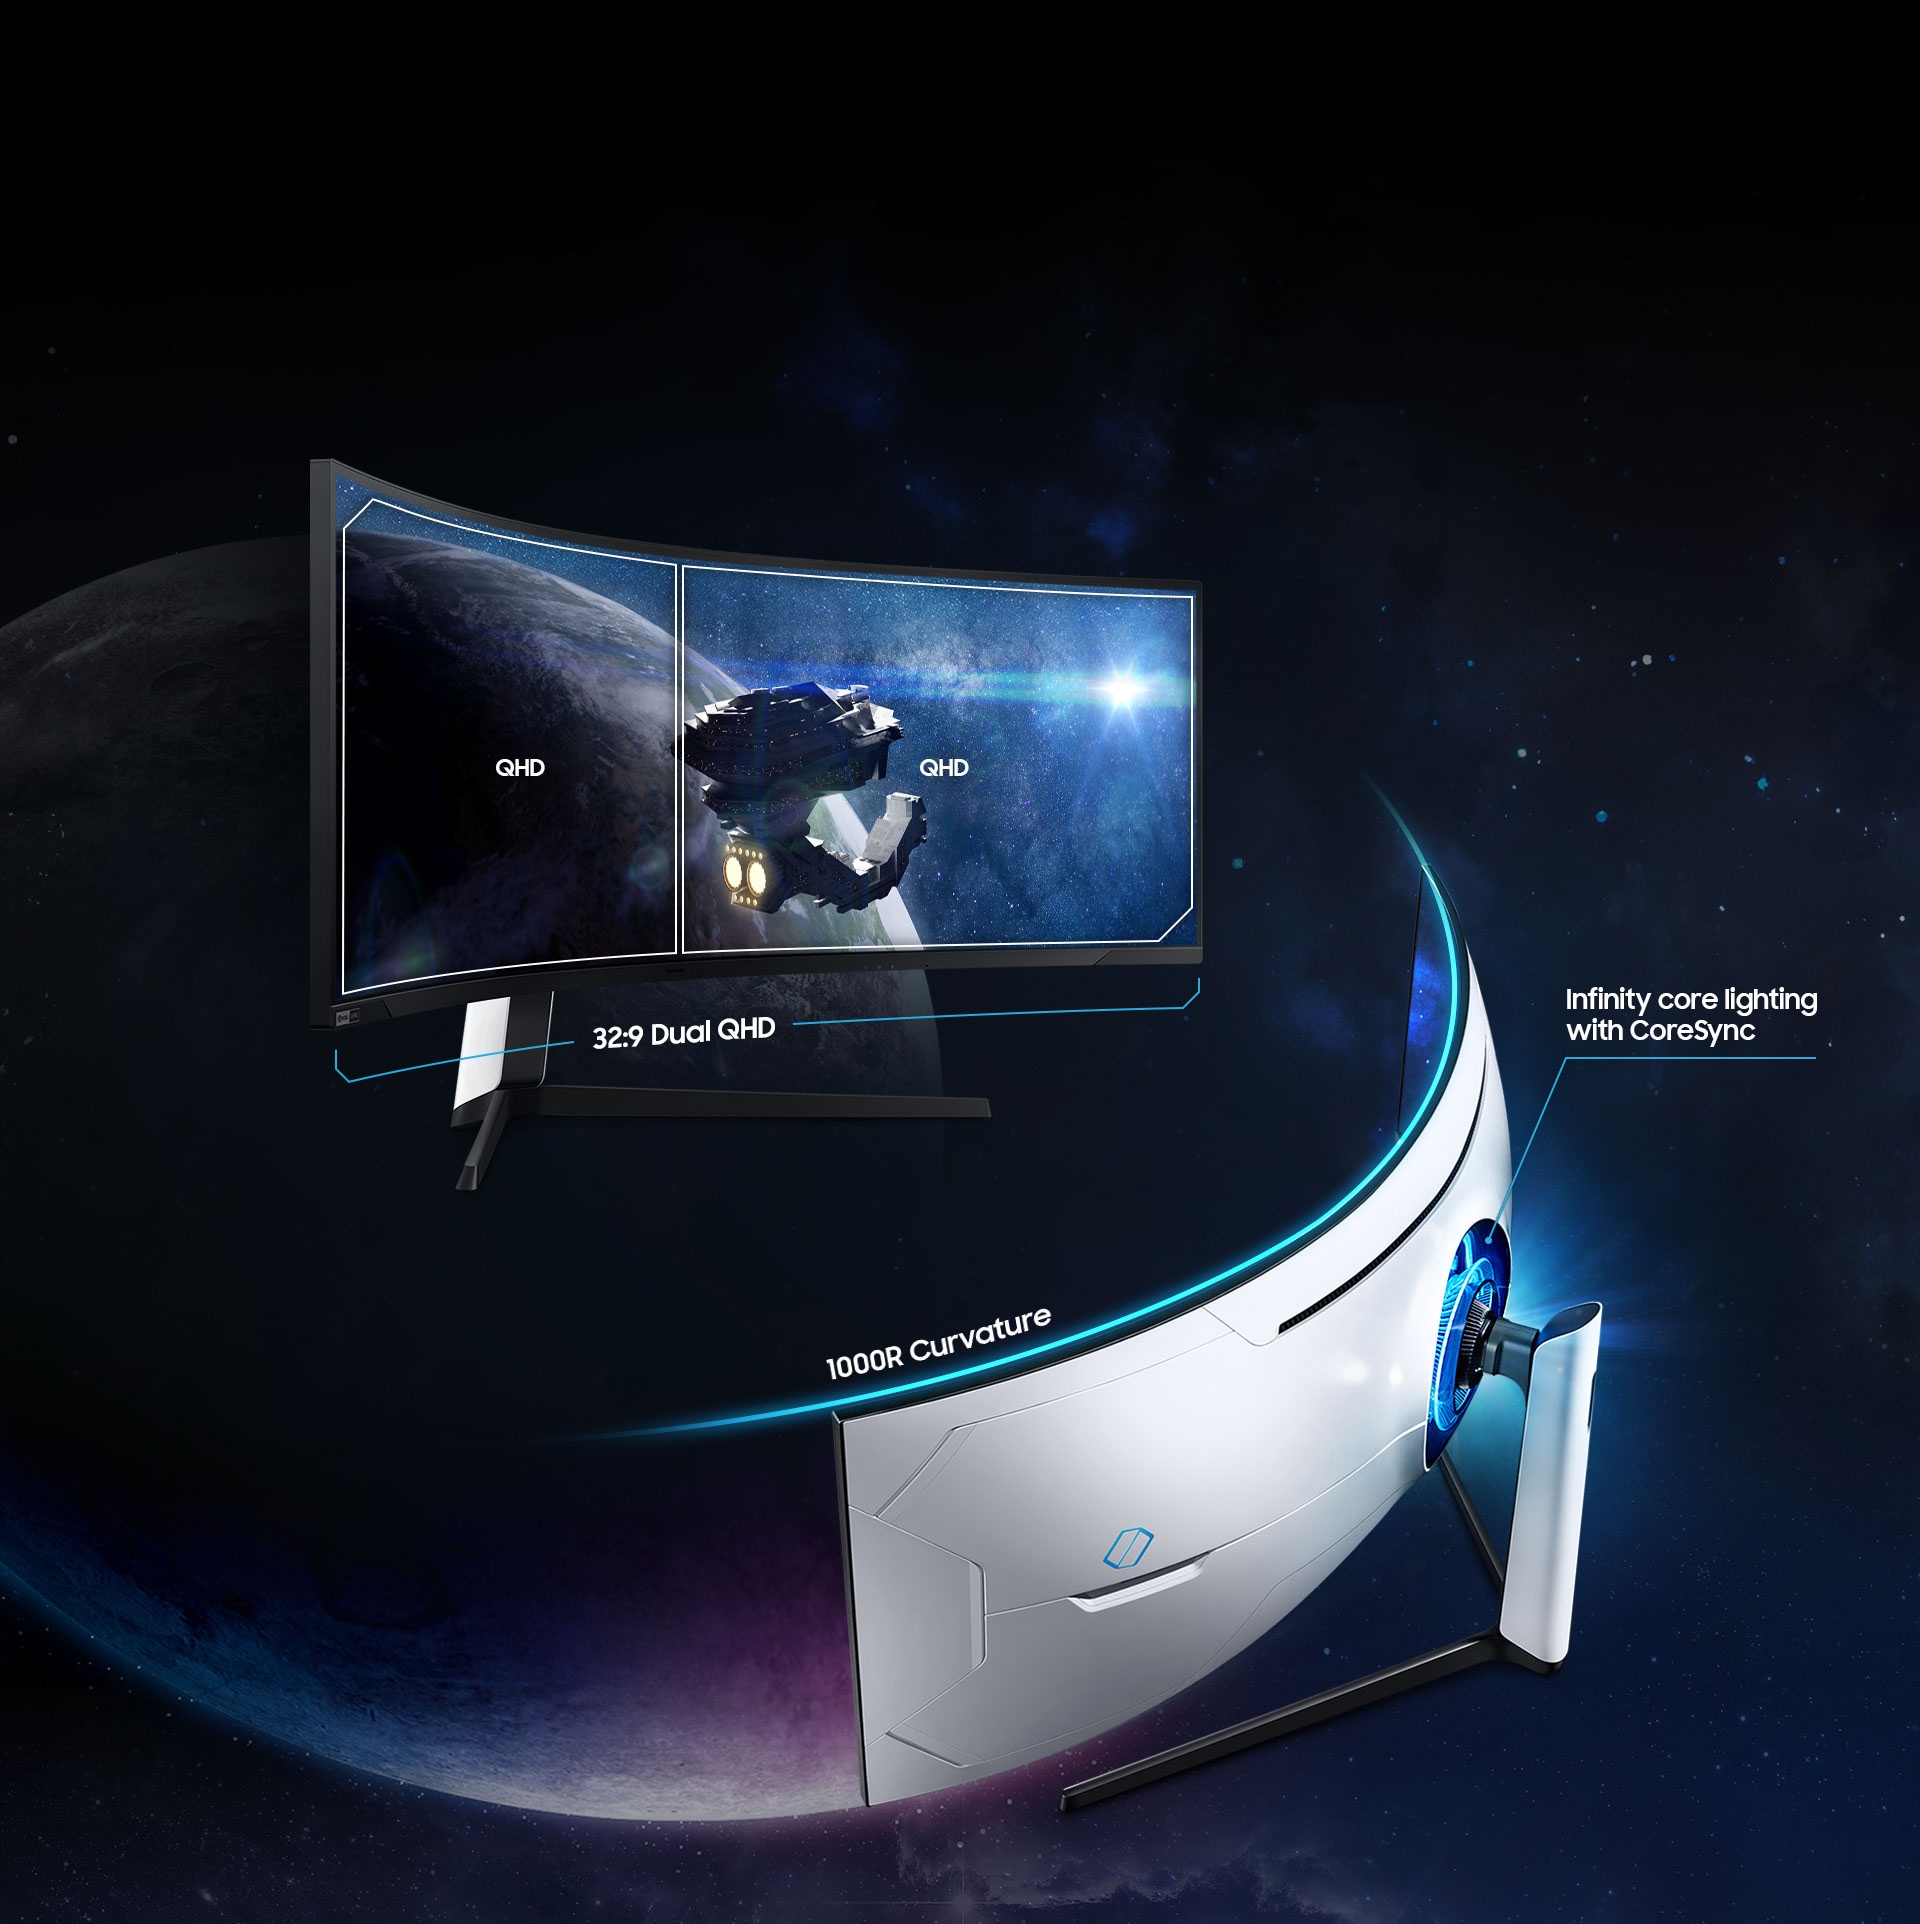 Two G9 monitors float in space. One shows its screen side and projects a spaceship with the words “QHD” on its left and right sides. Underneath the monitor, the words “32:9 Dual QHD” are shown. The second monitor is positioned to show its 1000R Curvature and Infinity core lighting with CoreSync, which illuminates in blue against the back's white design.